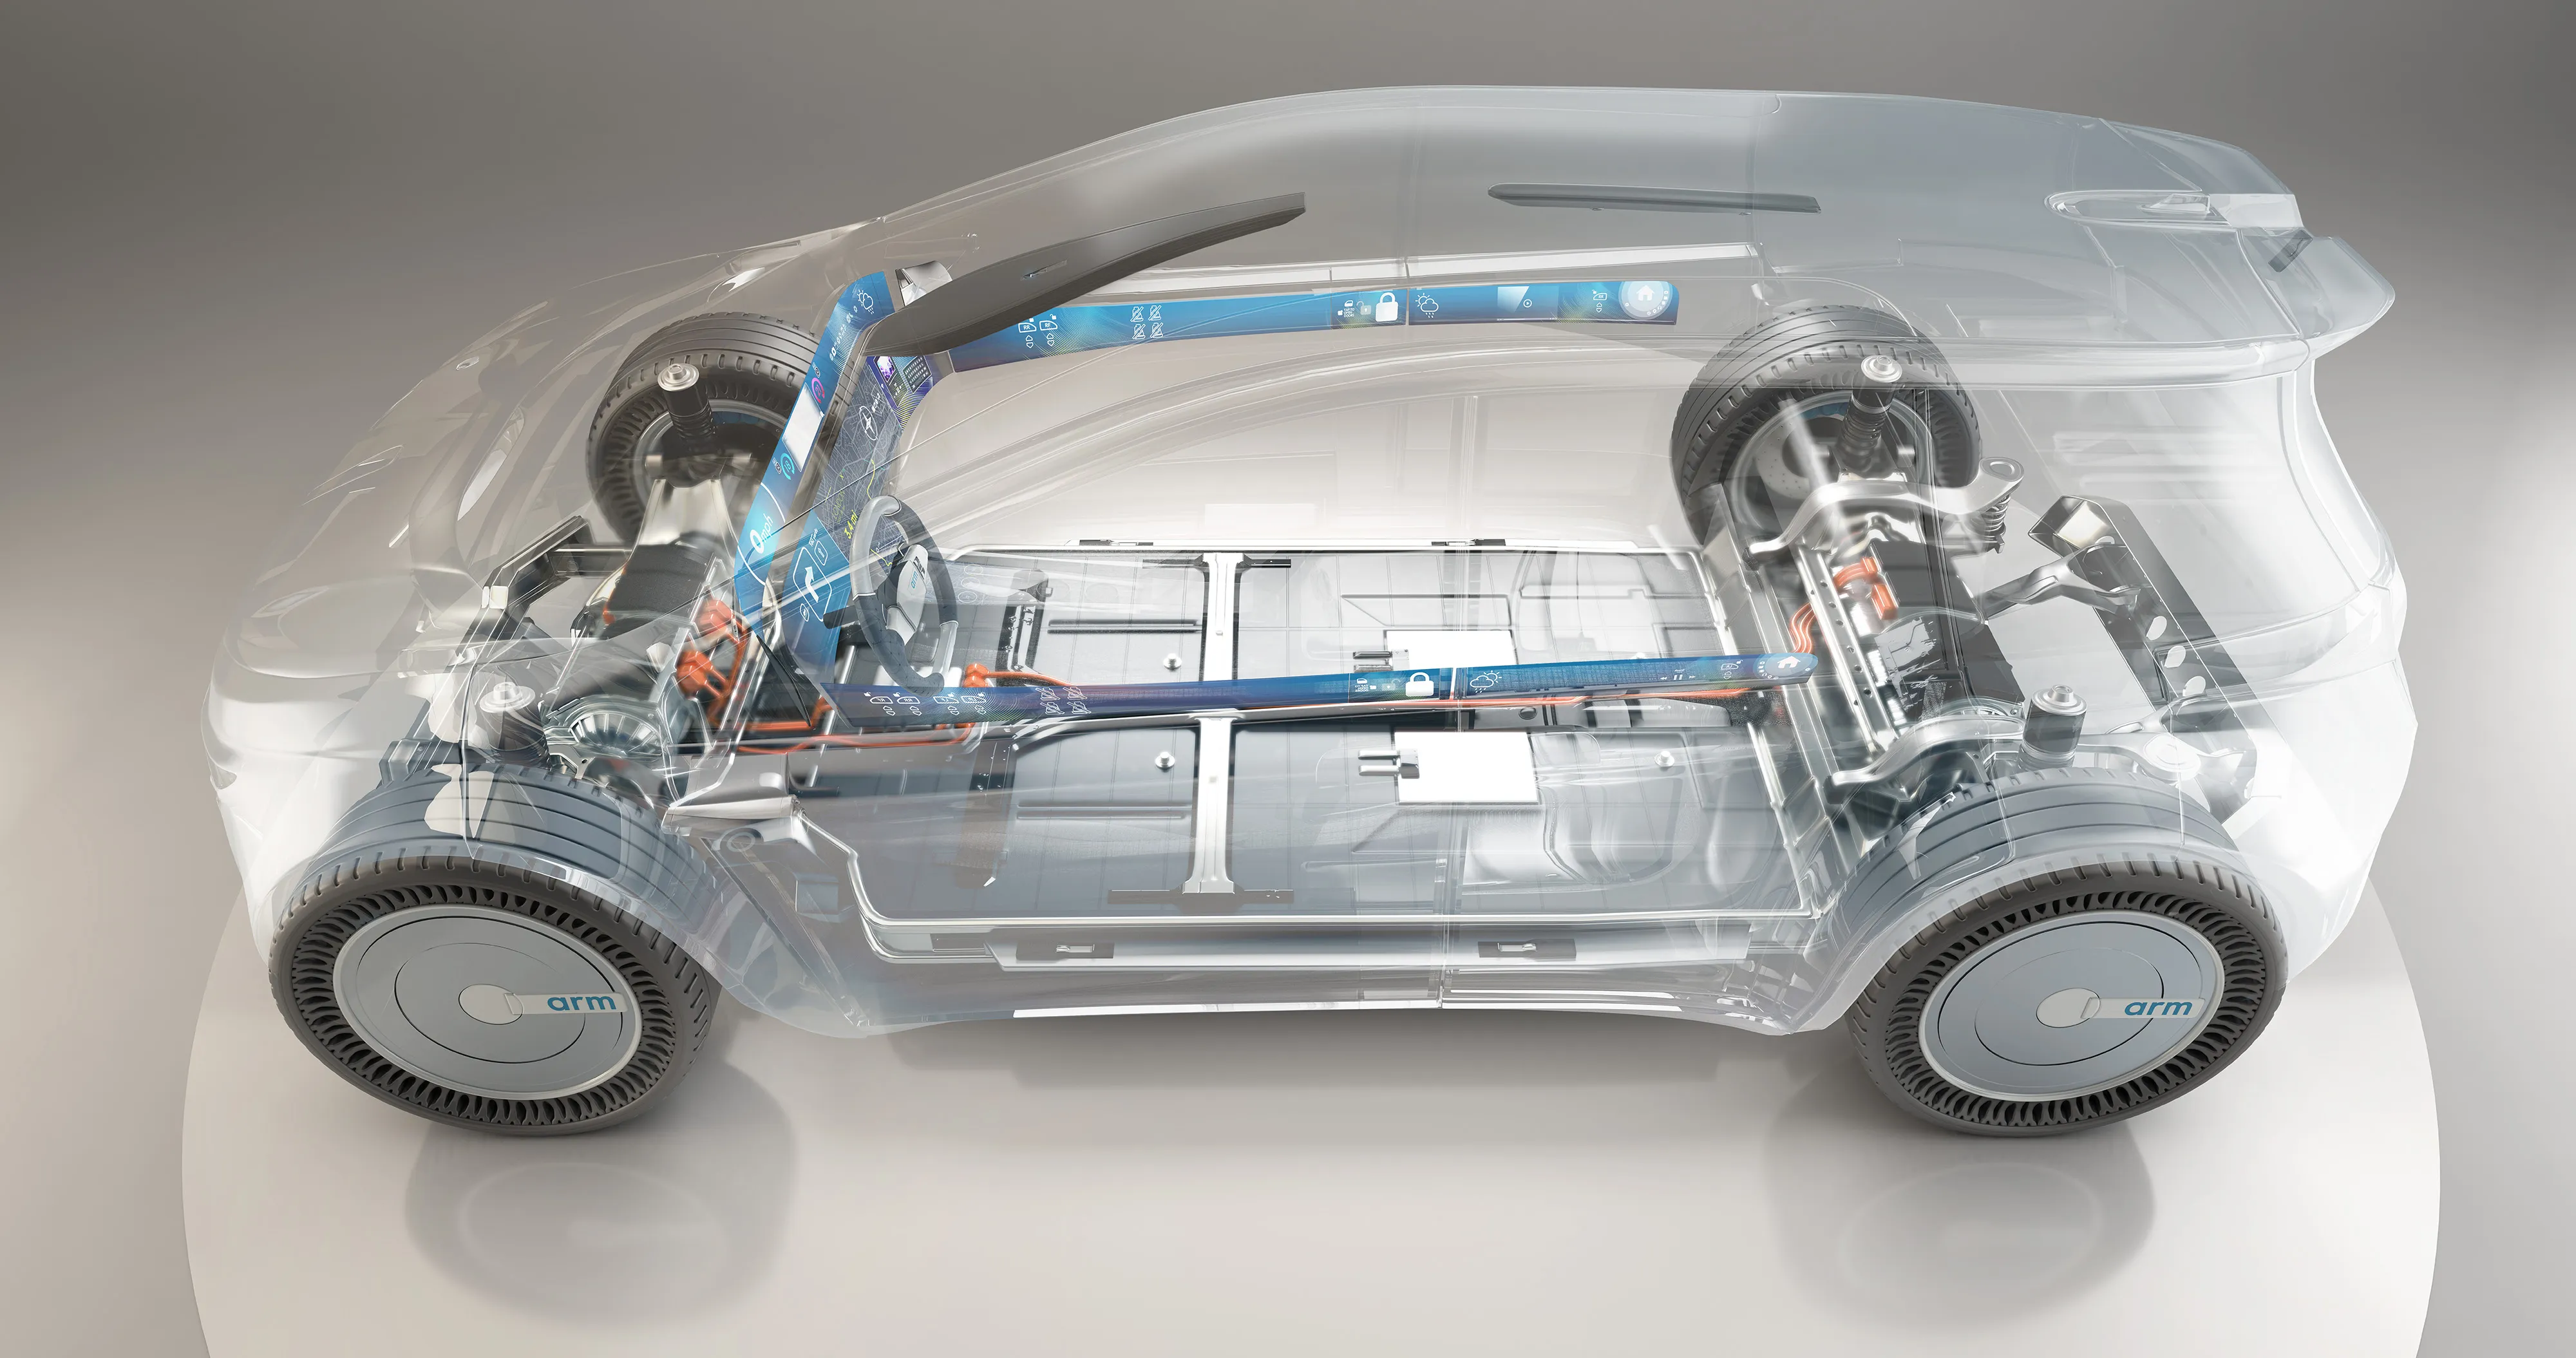 3D Render of inside the vehicle